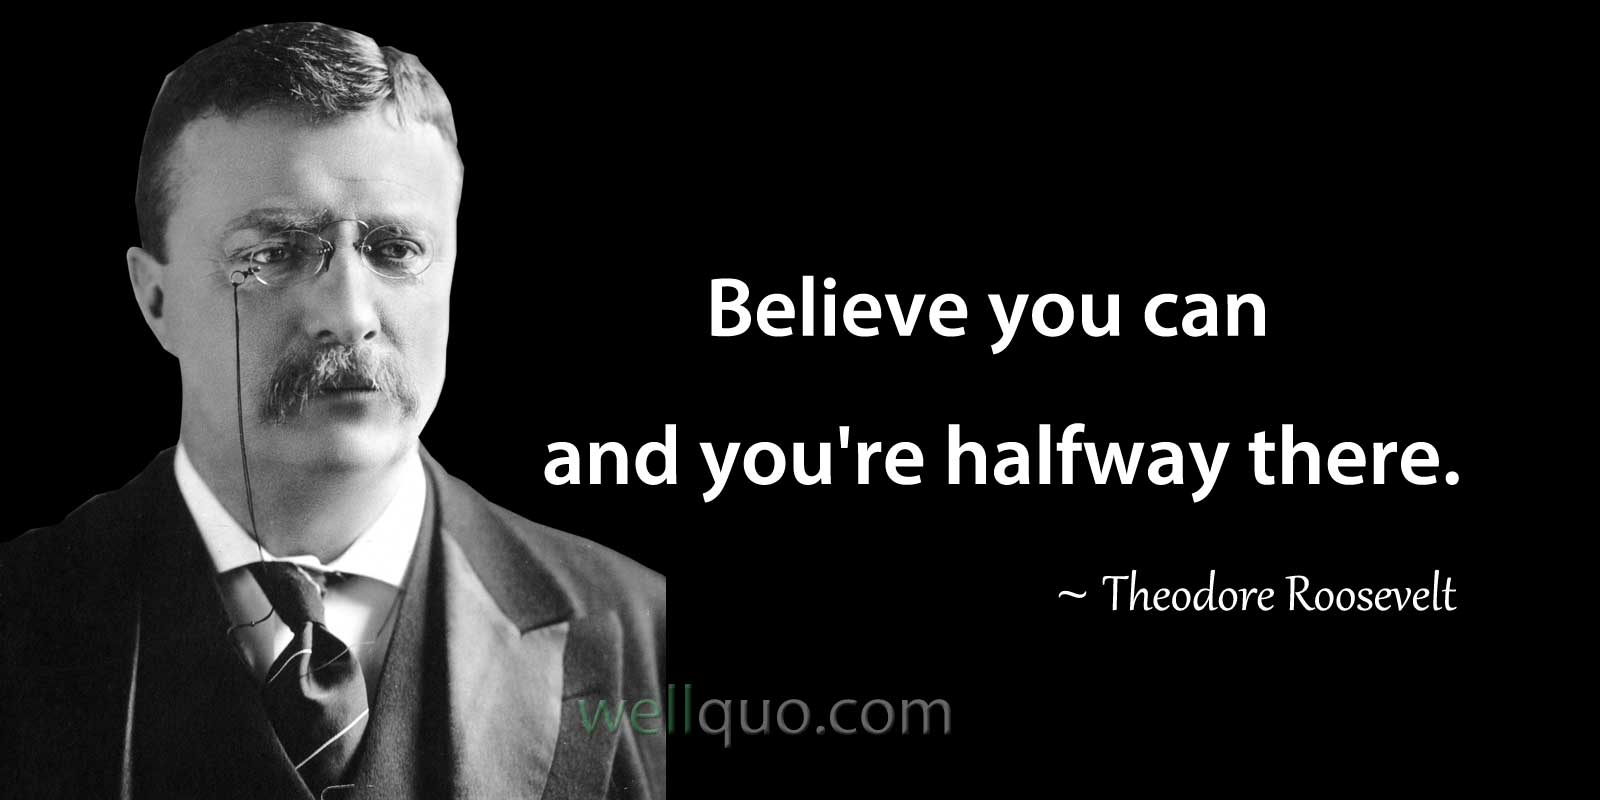 theodore roosevelt famous quotes